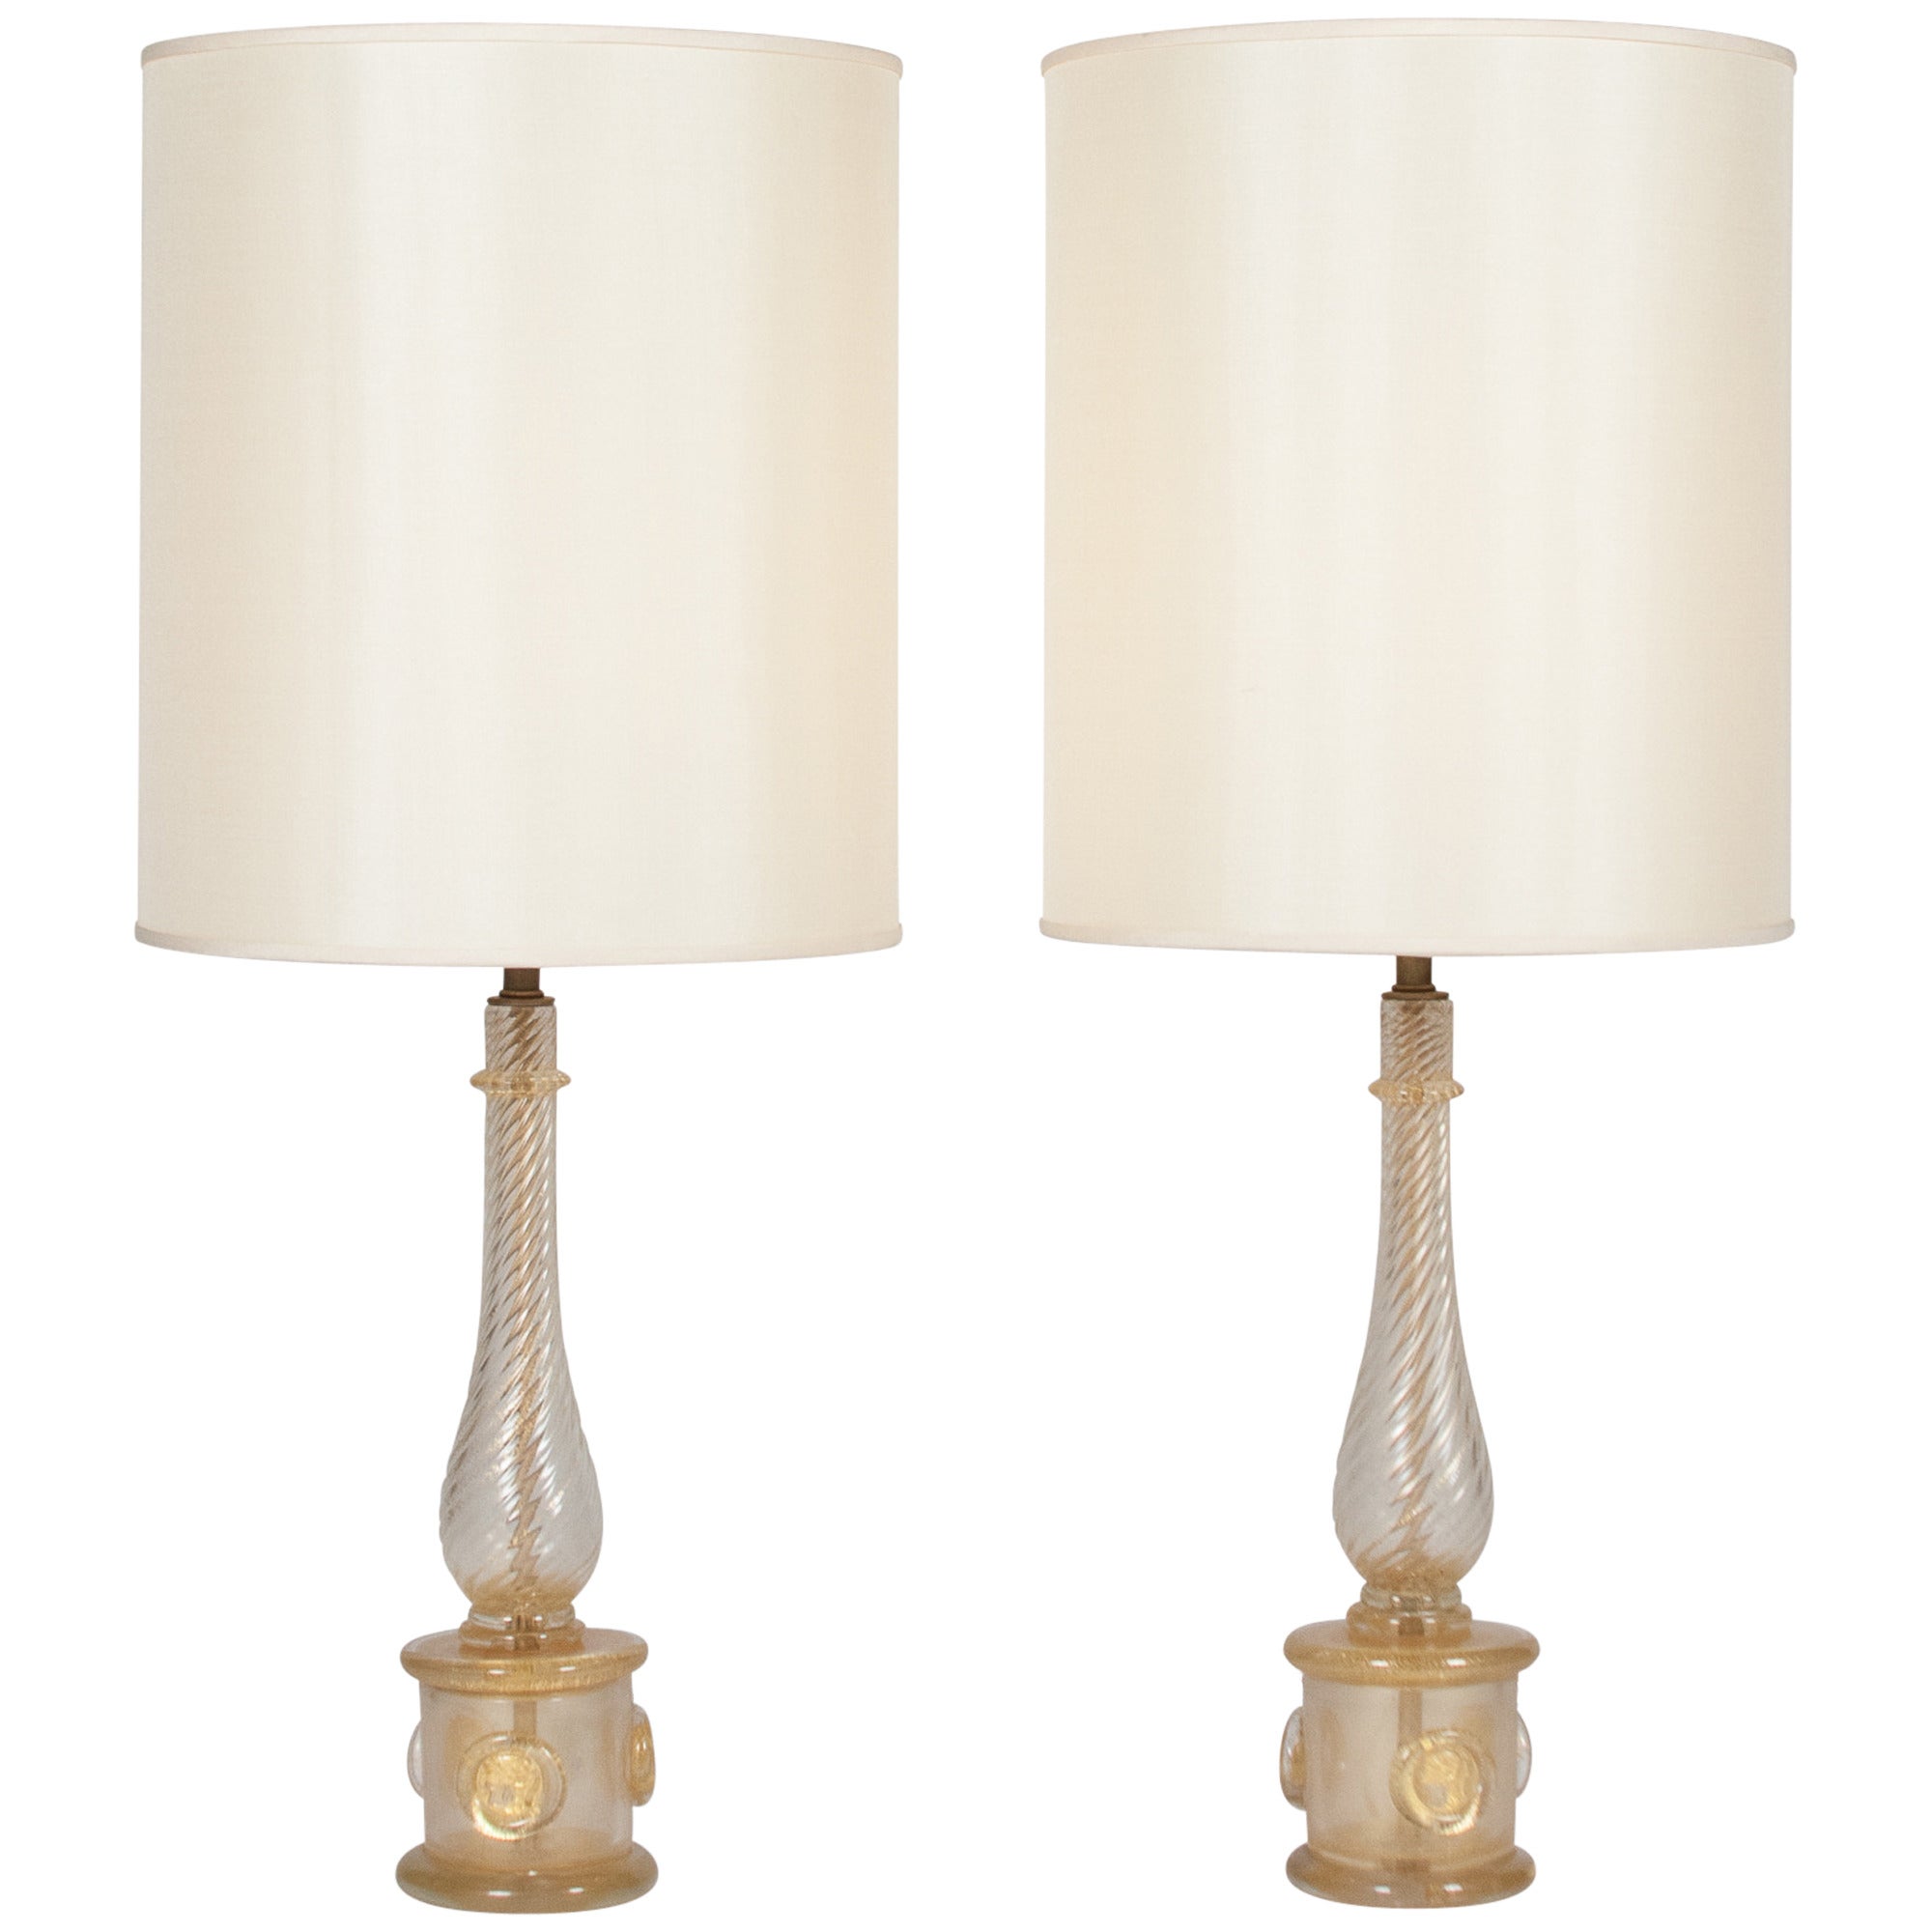 Pair of Gold Glass Lamps by Barovier e Toso, Italian, 1940s For Sale